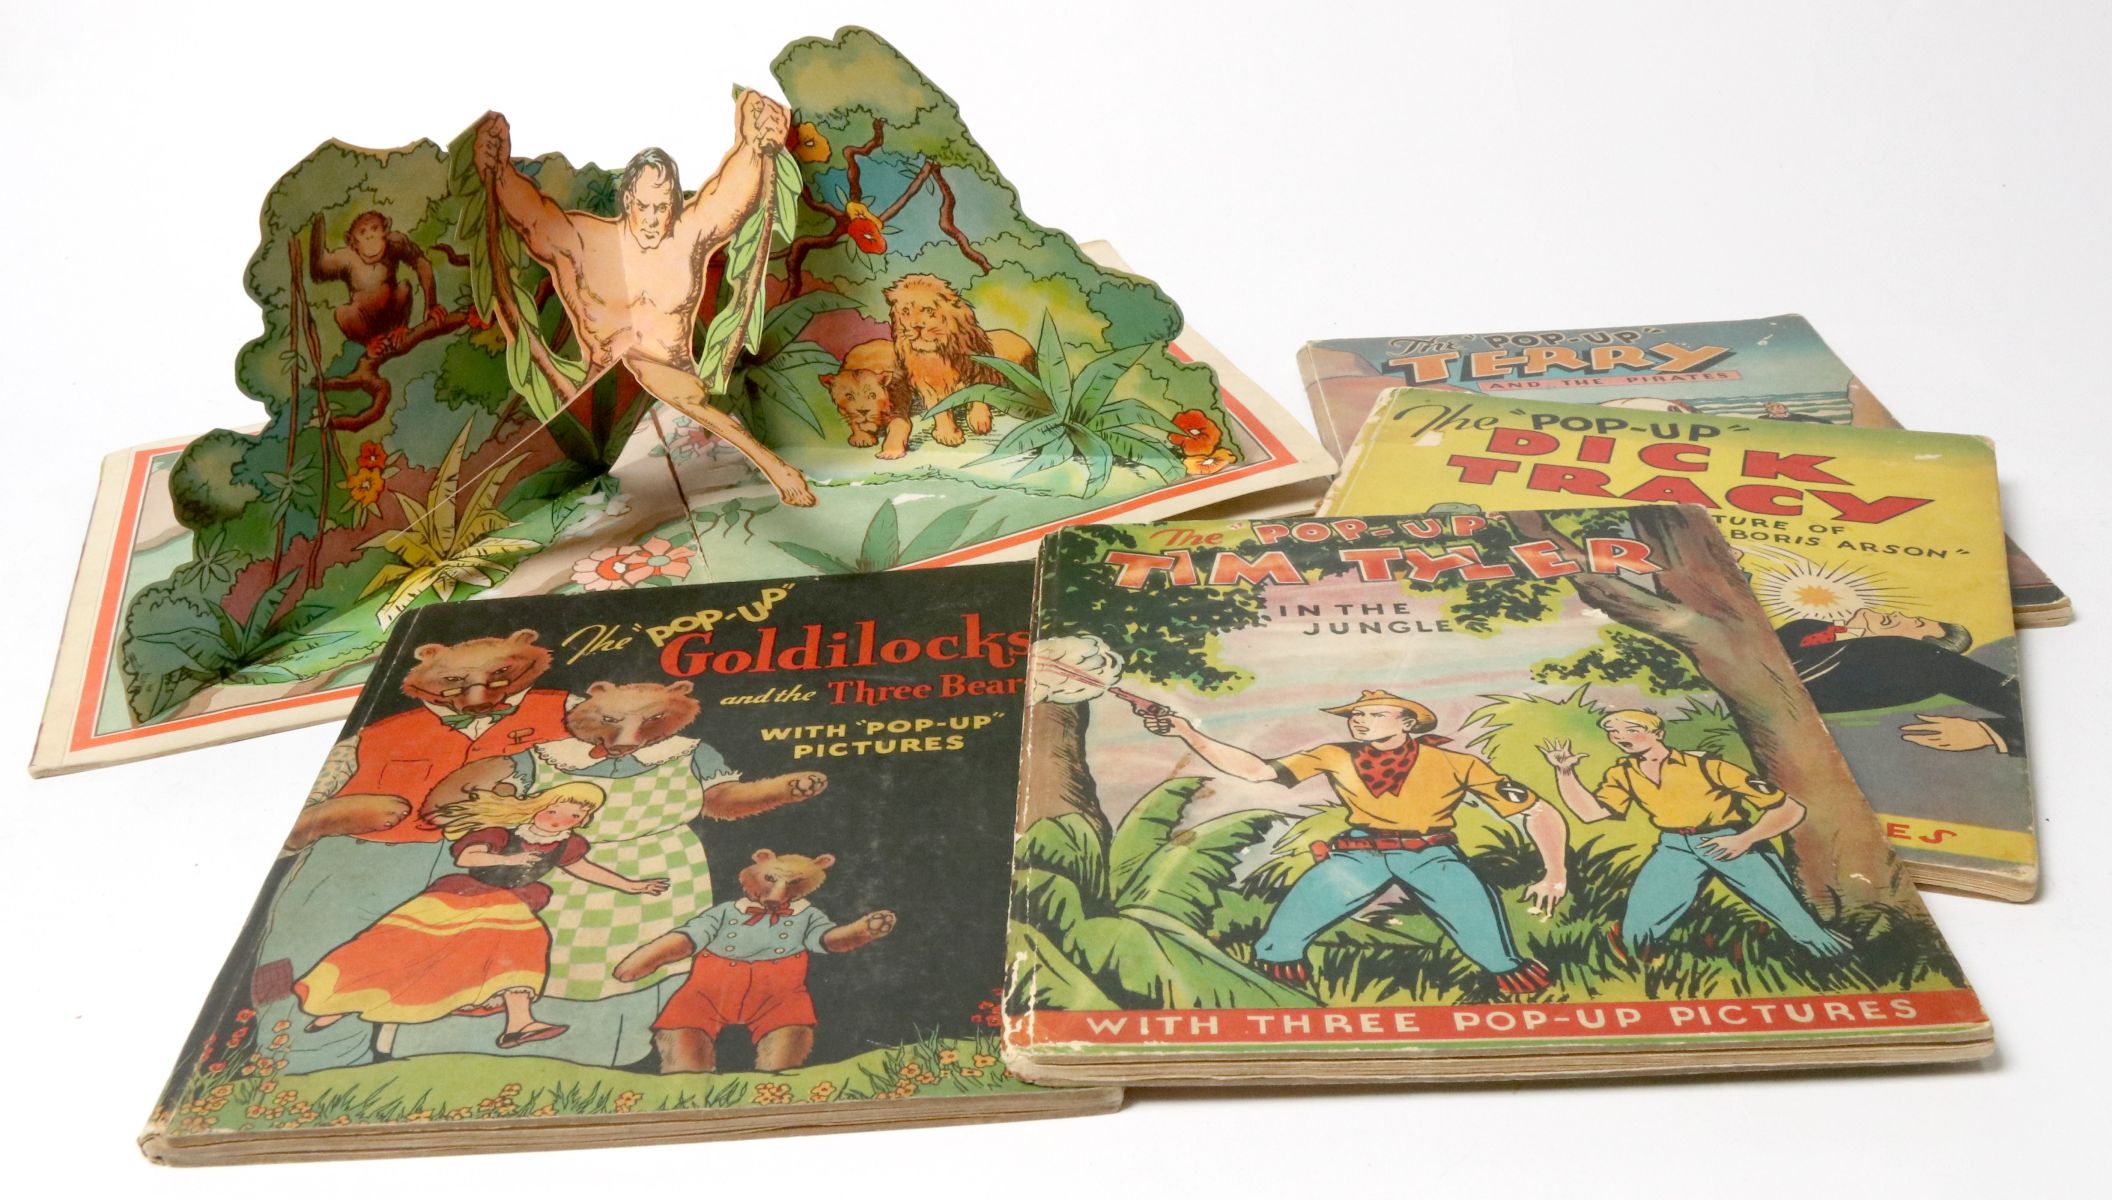 A COLLECTION OF 1930s CHARACTER POP-UP BOOKS